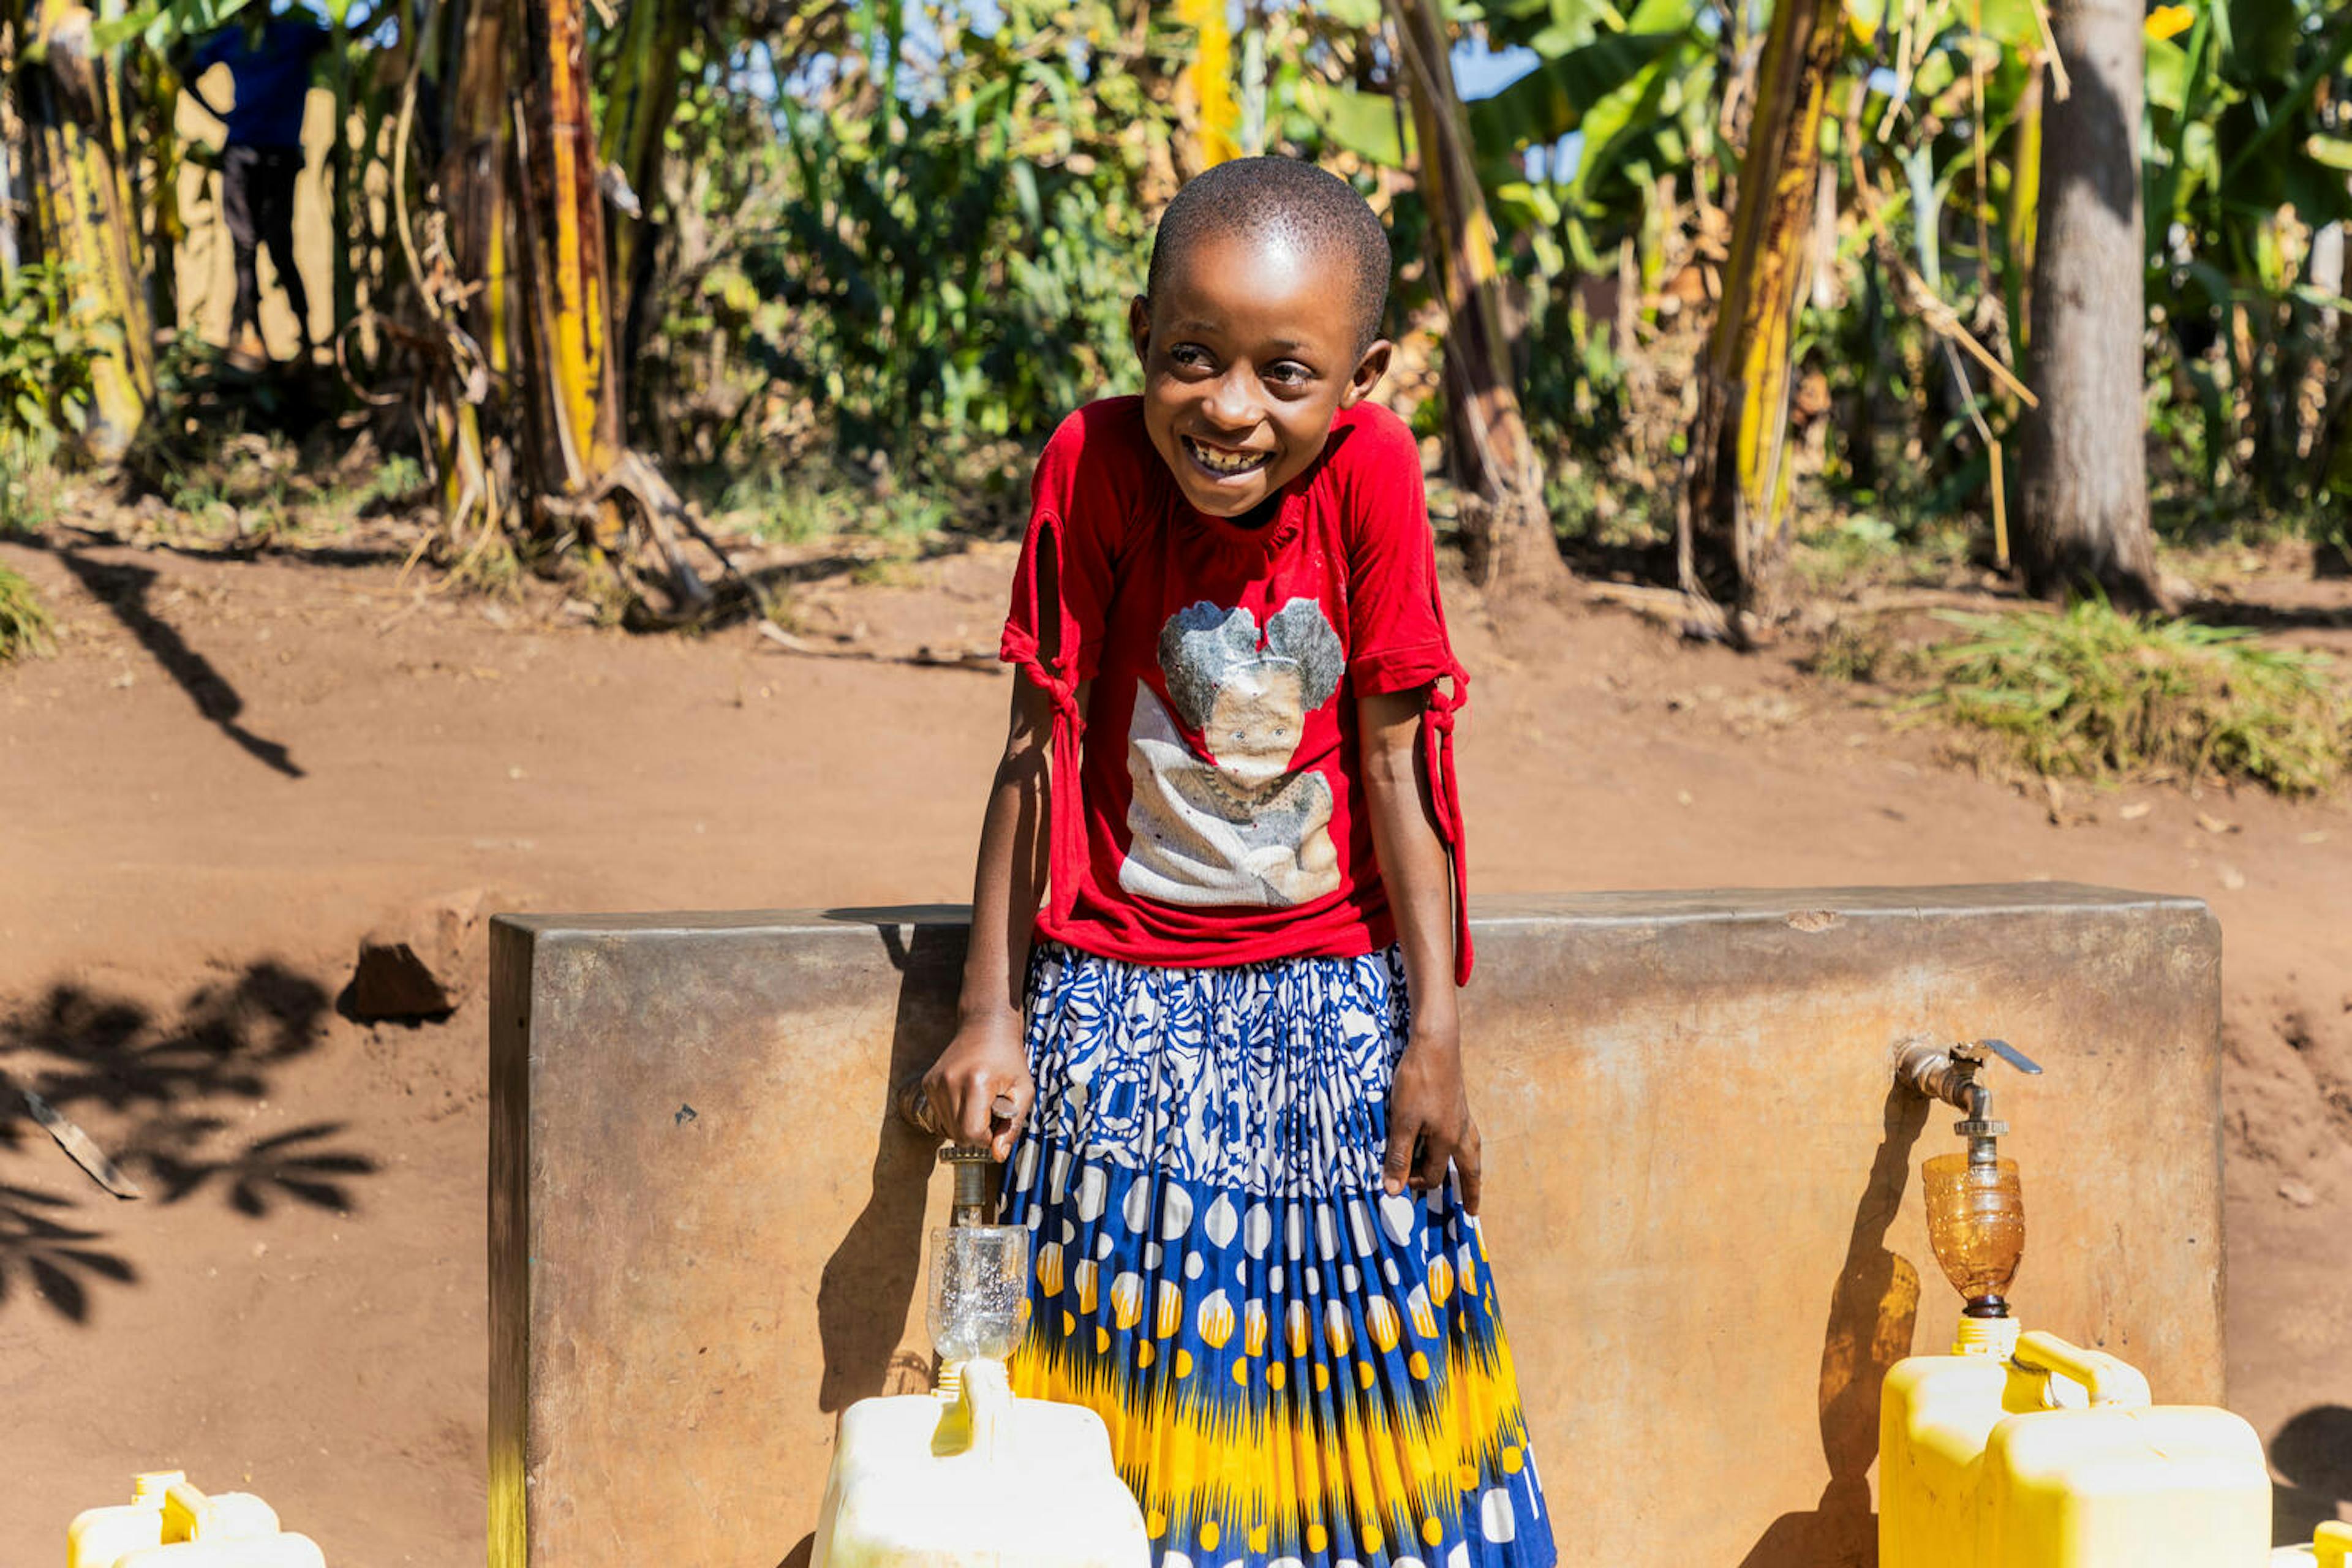 8-year-old Bonette fills water containers from taps that are part of a solar-powered water supply system in her neighbourhood in Kigarama Sector, Kirehe District, Eastern Province of Rwanda.